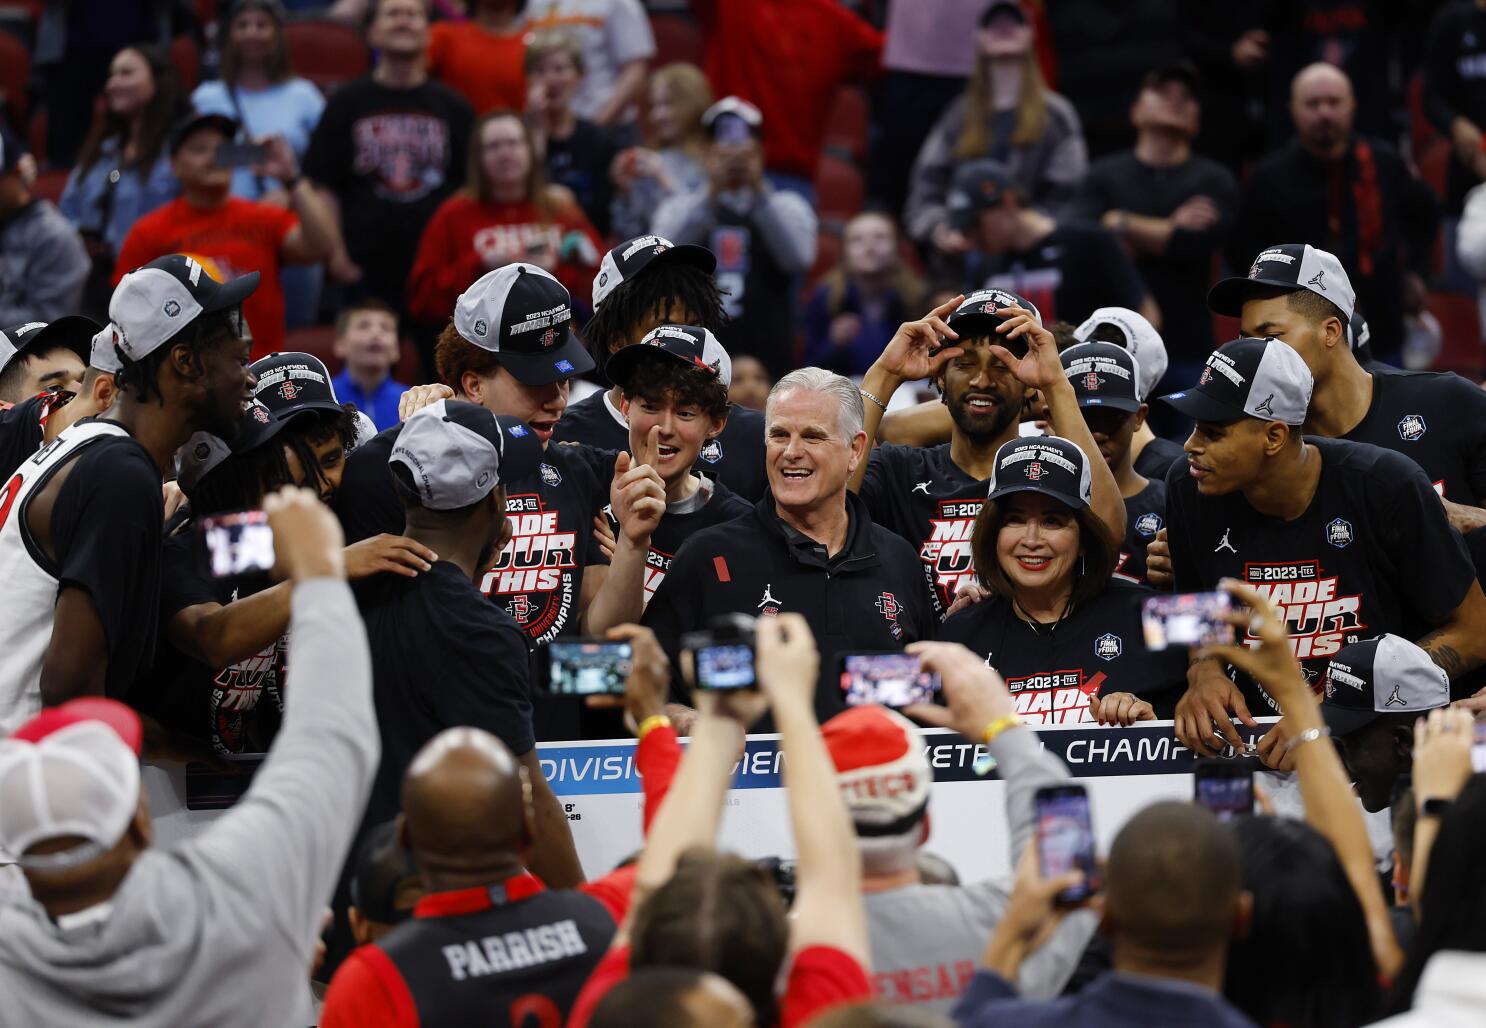 First Sweet 16 appearance proved that upstart Aztecs belonged on big stage  - The San Diego Union-Tribune